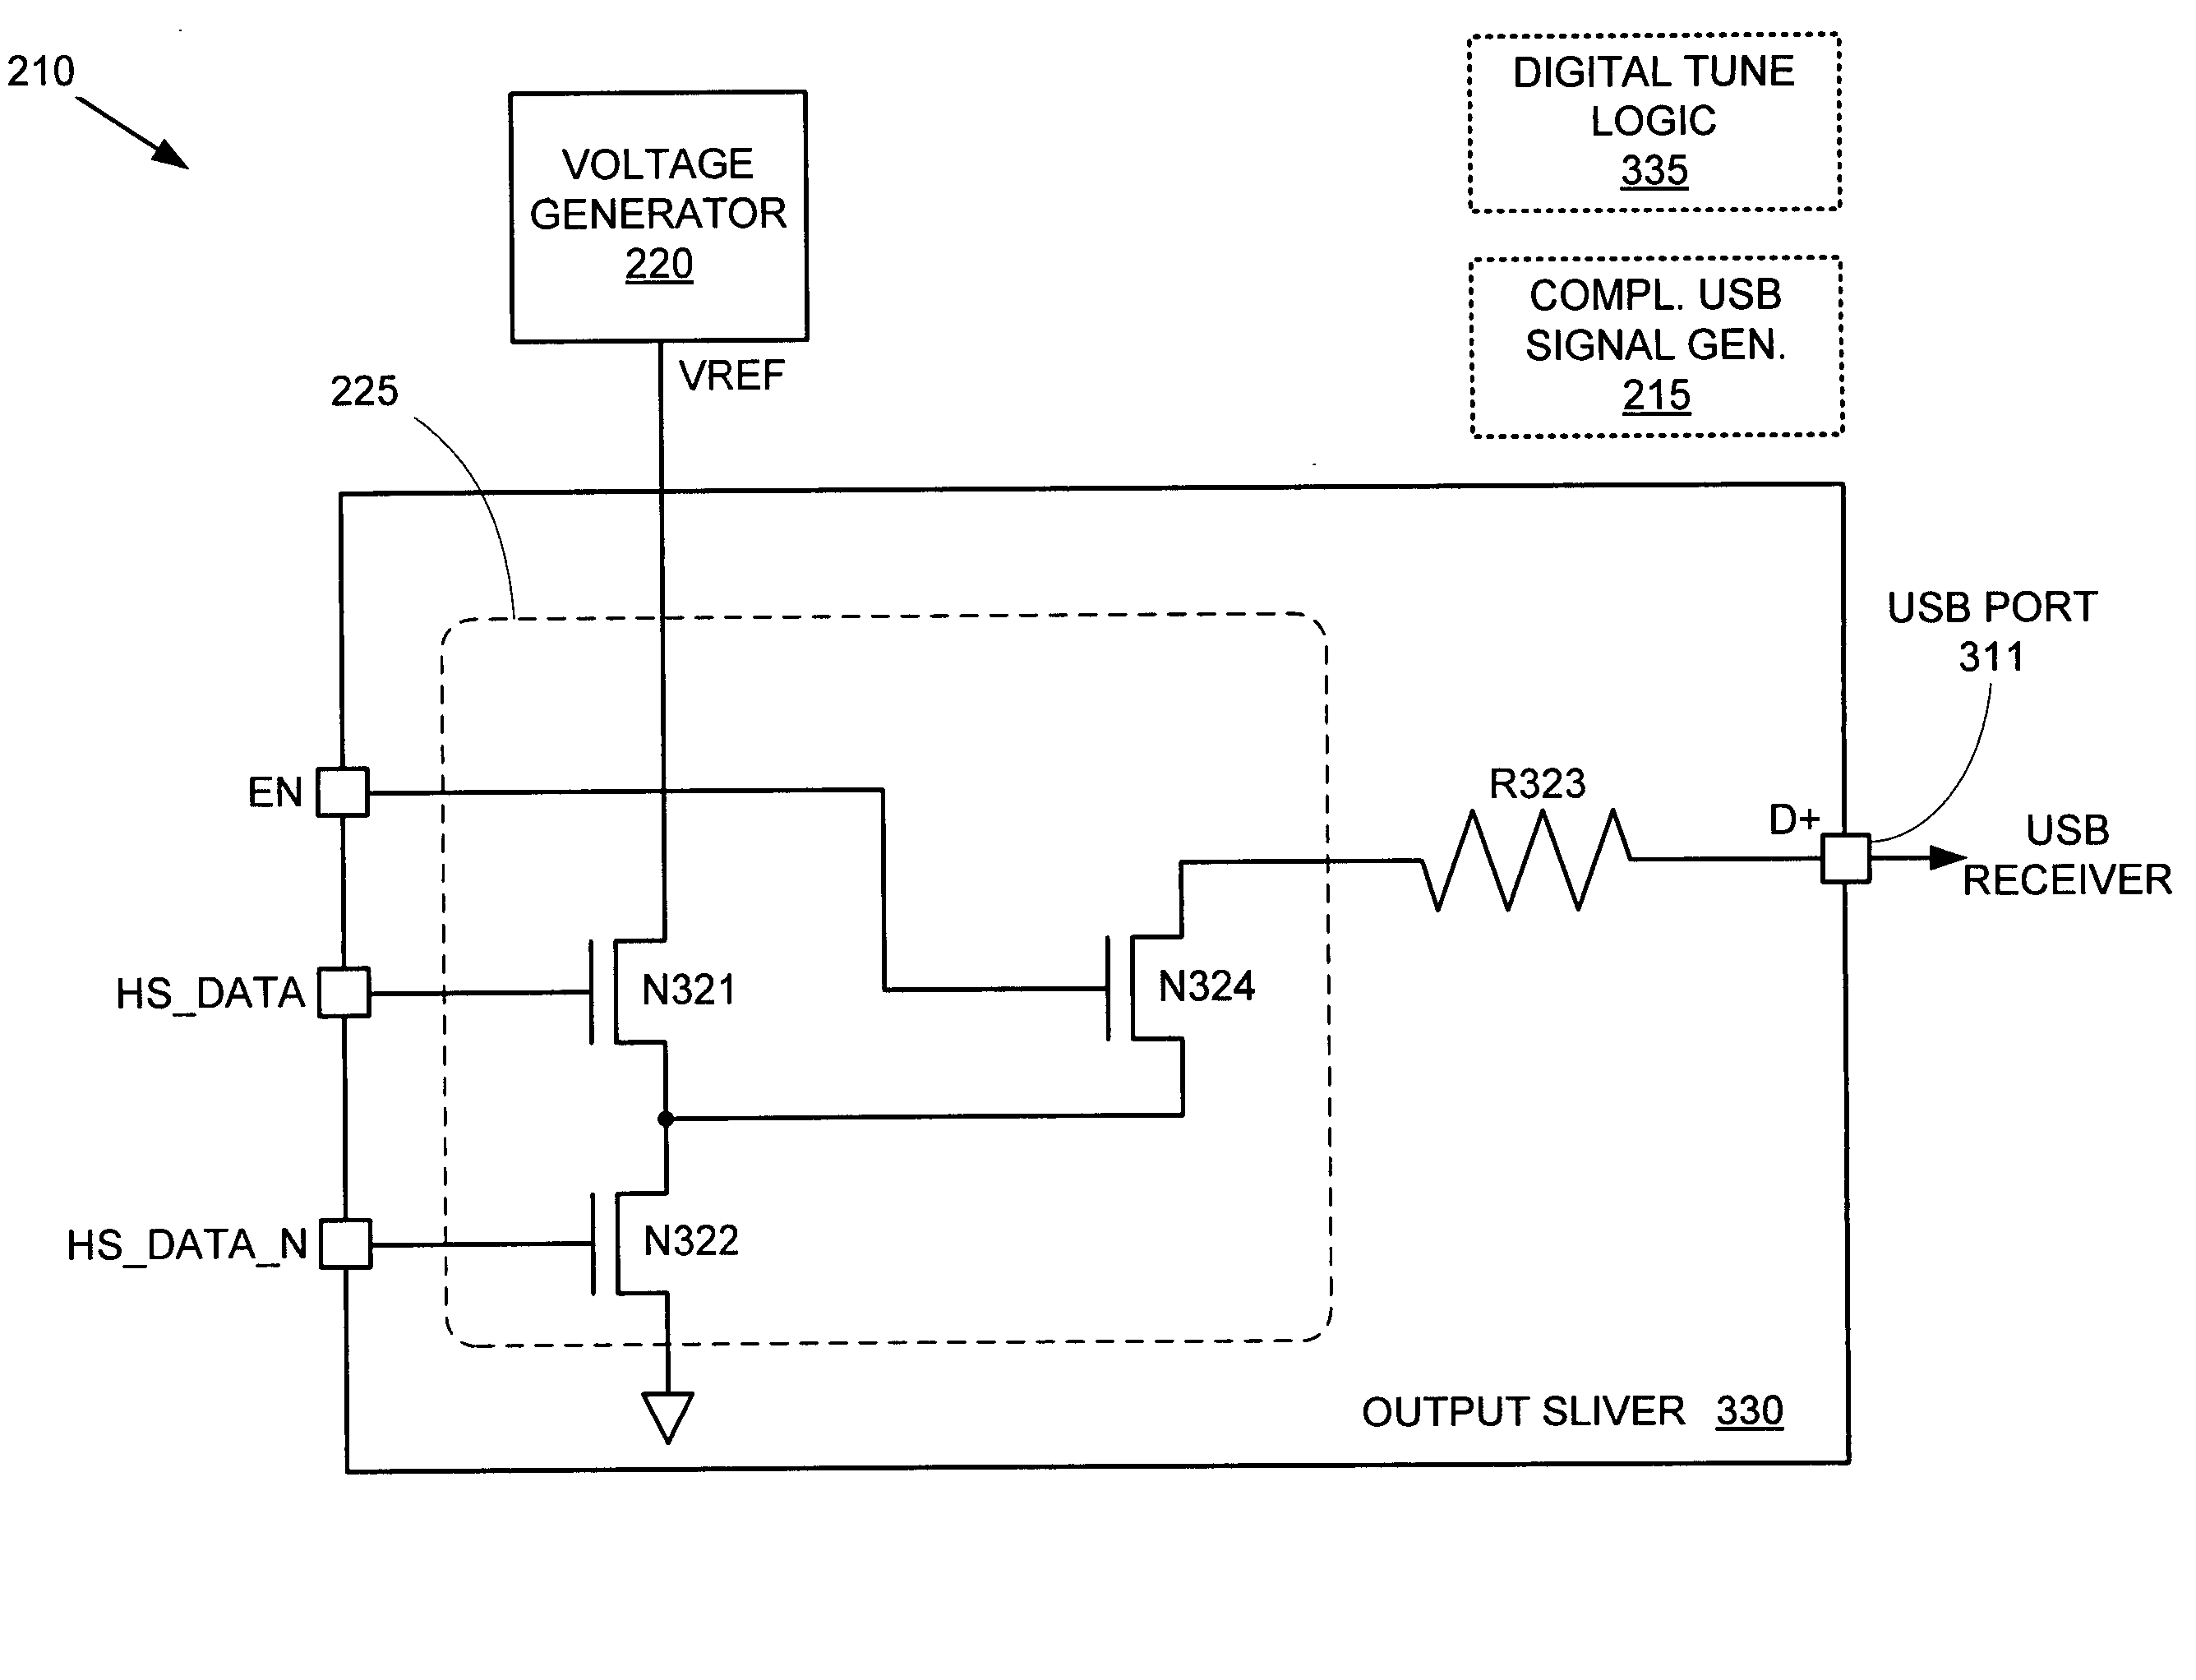 USB 2.0 HS voltage-mode transmitter with tuned termination resistance